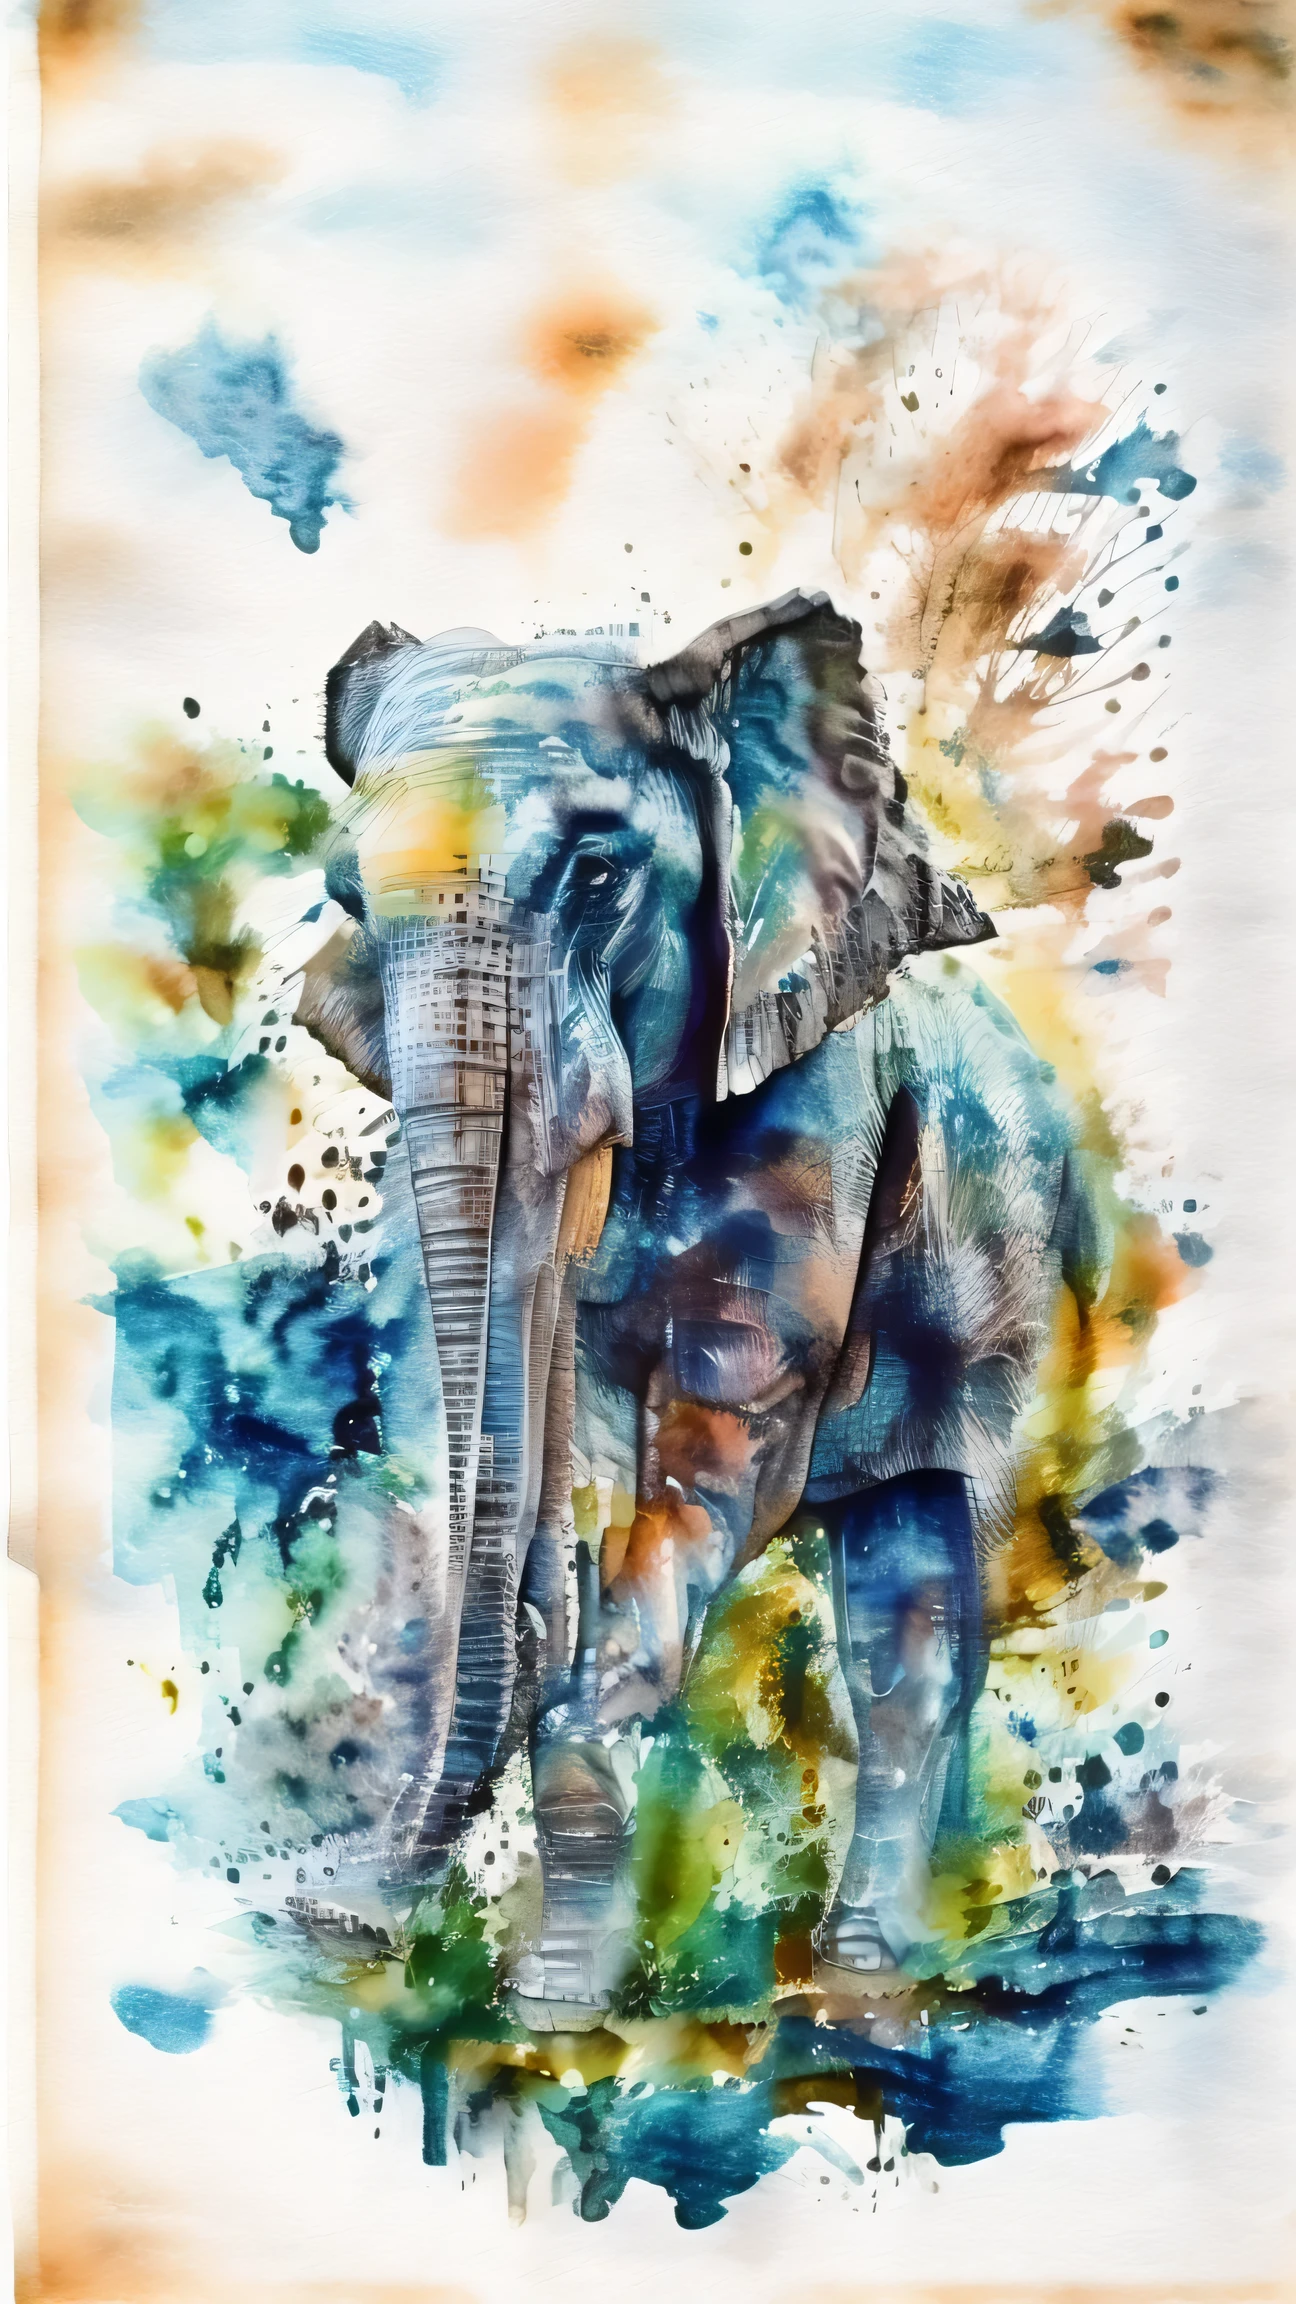 Africa, elephant walking in a river, surrounded by trees and grass, wildlife scene, natural habitat, nature, animal, water, realistic, sky, scenery, grass, forest, animal_focus, modern art, painting, drawing, watercolor, psychedelic colors